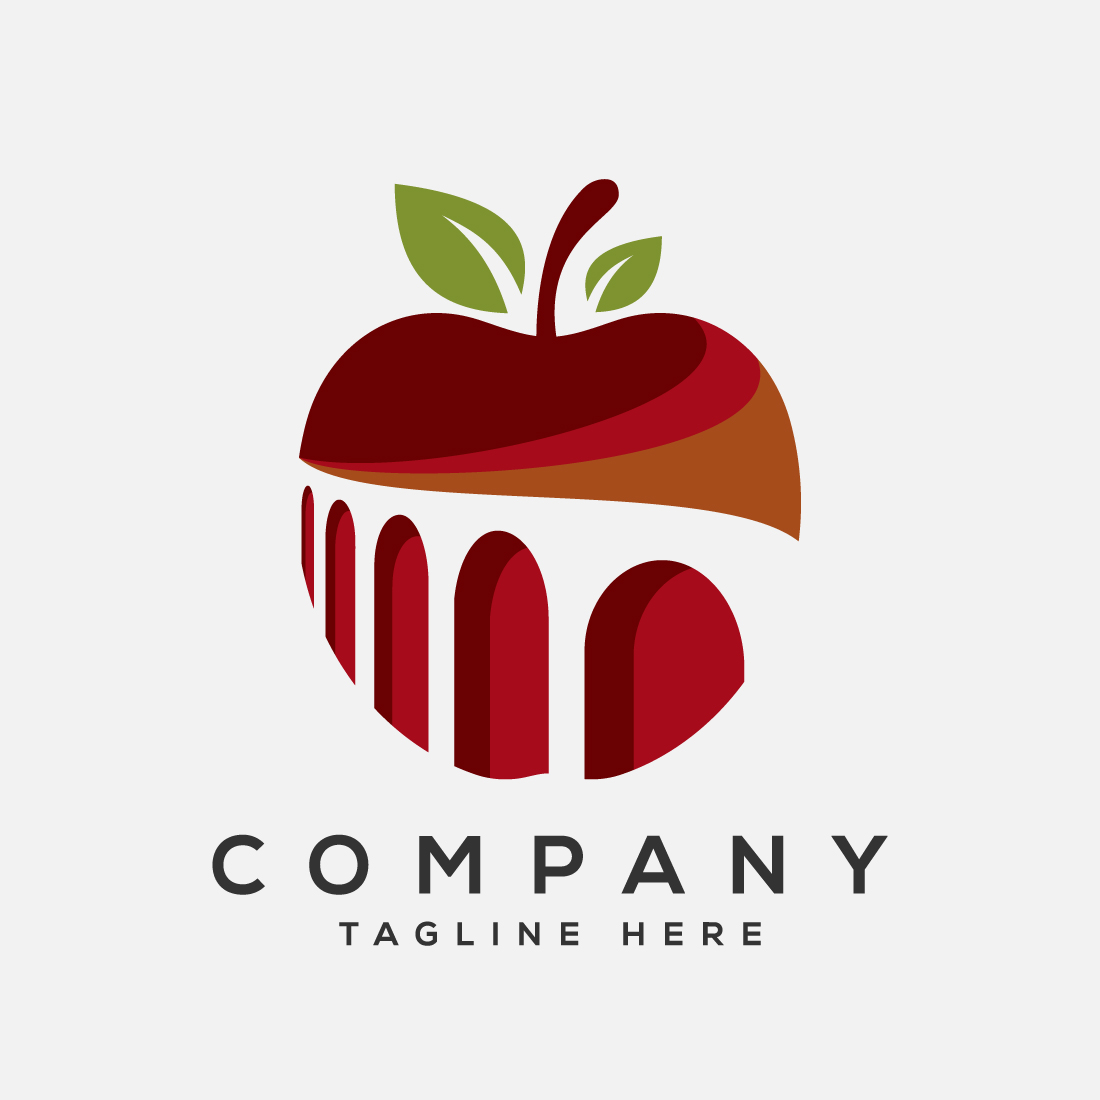 Apple constriction logo sign symbol in flat style preview image.